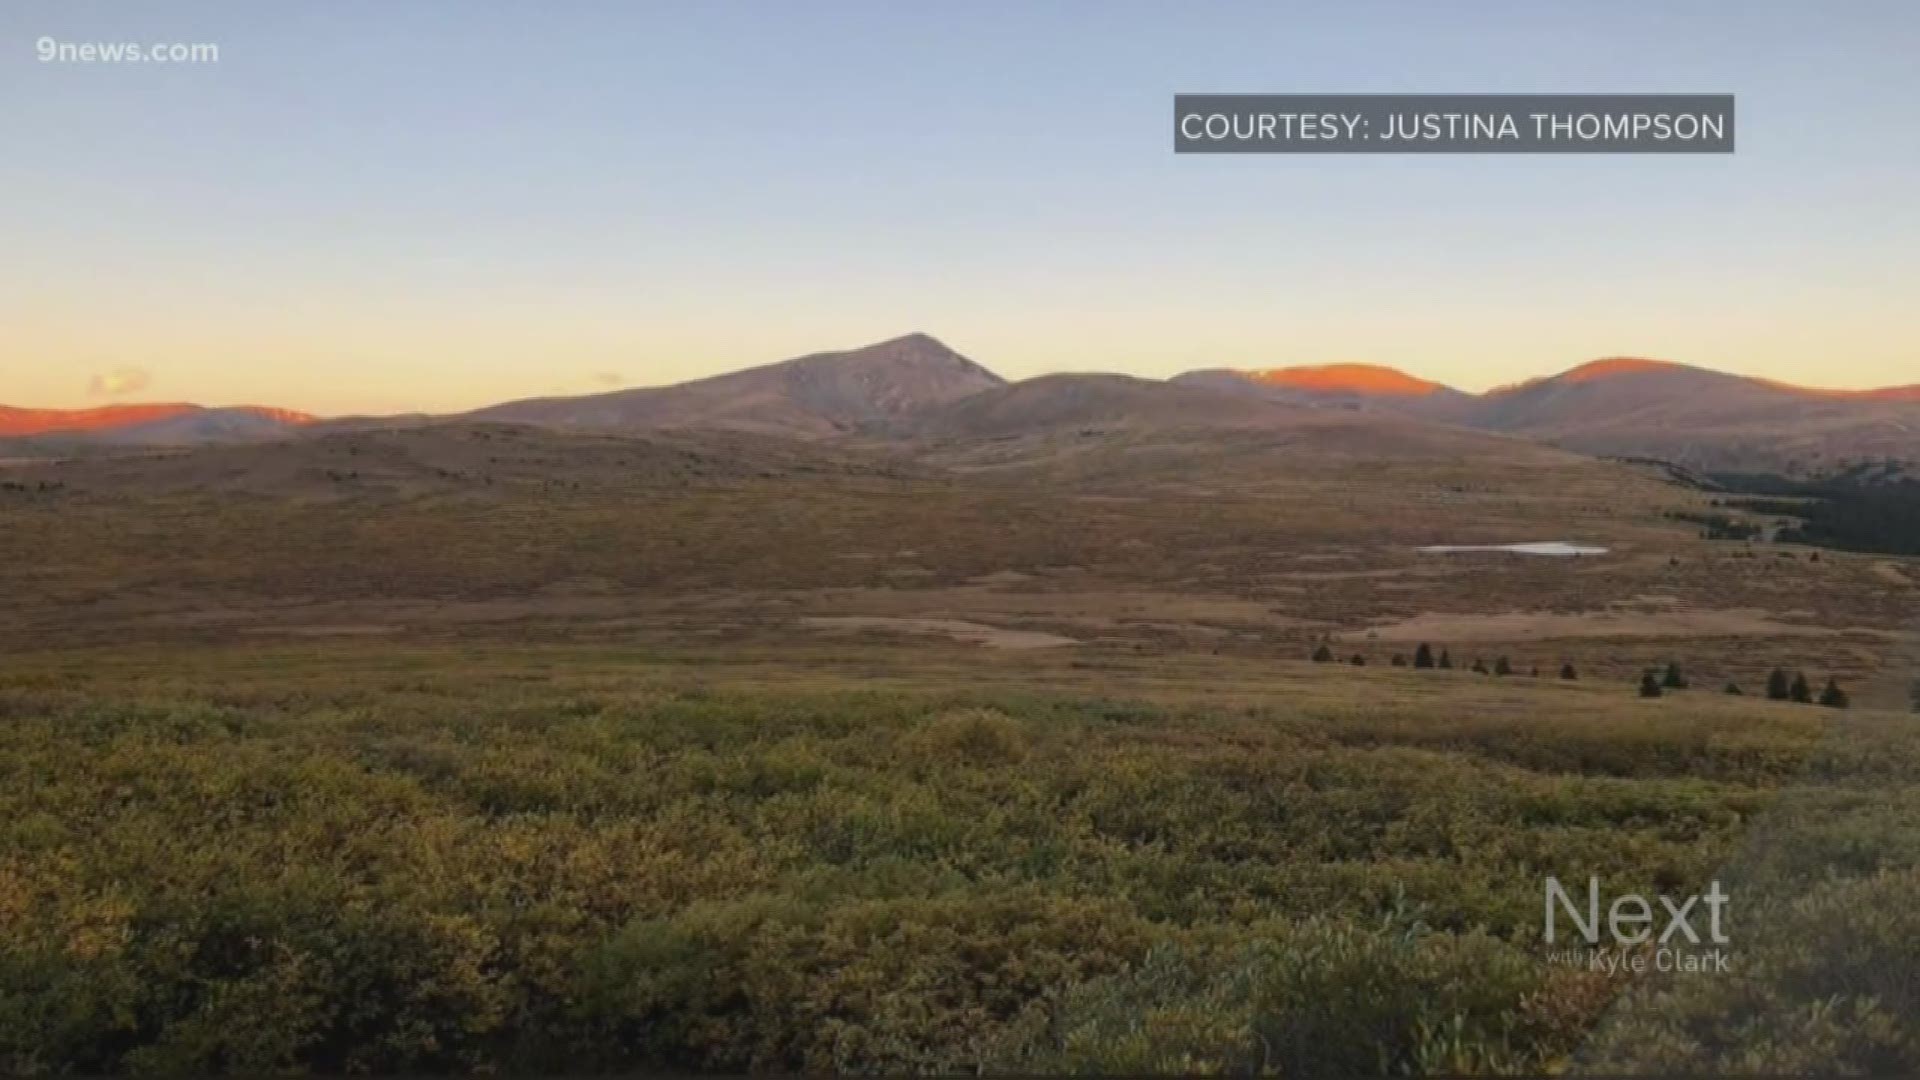 Justina Thompson is hoping to find a man named Aaron whose kindness helped her scale Mt. Bierstadt.